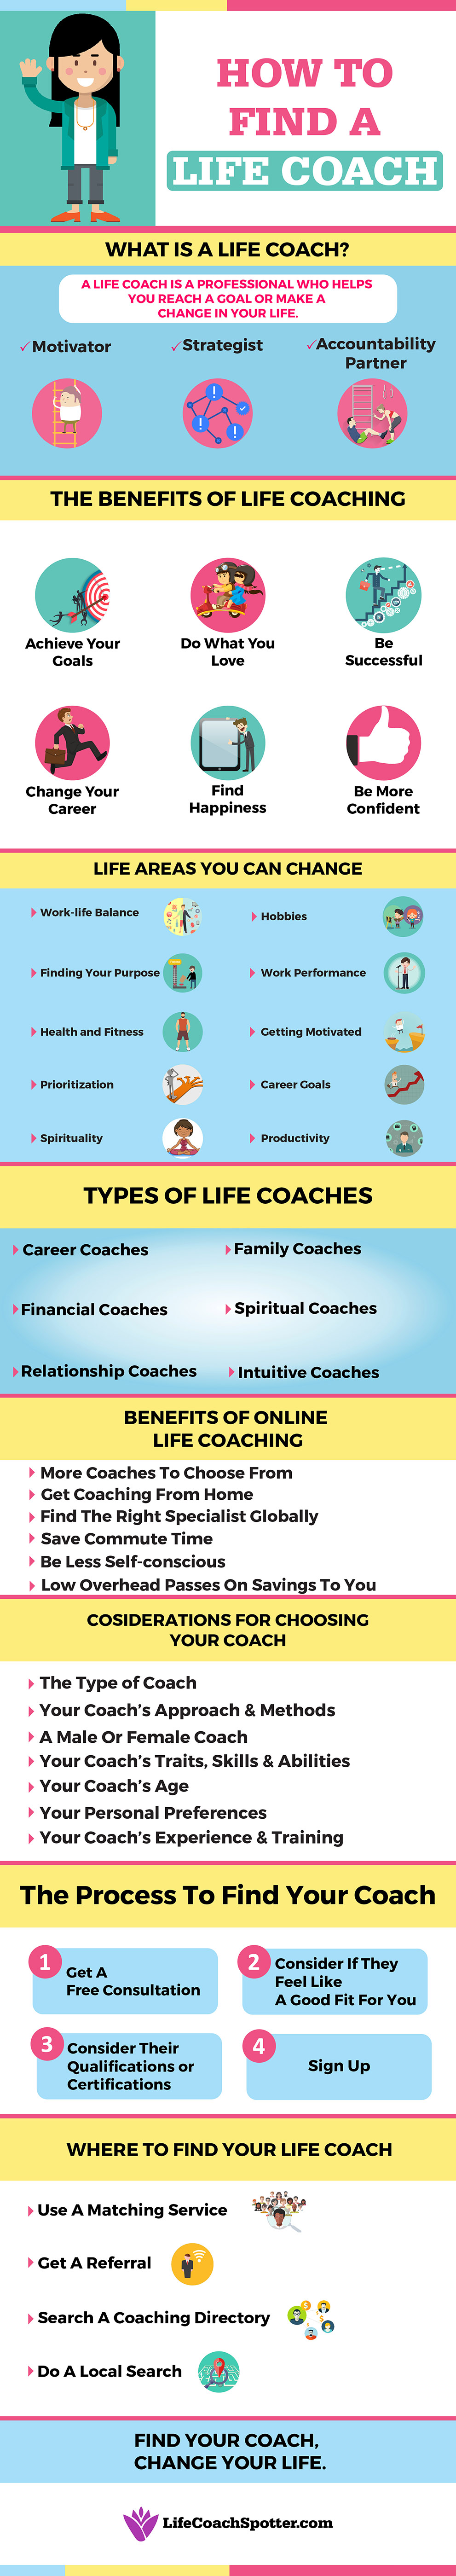 How to Find a Life Coach